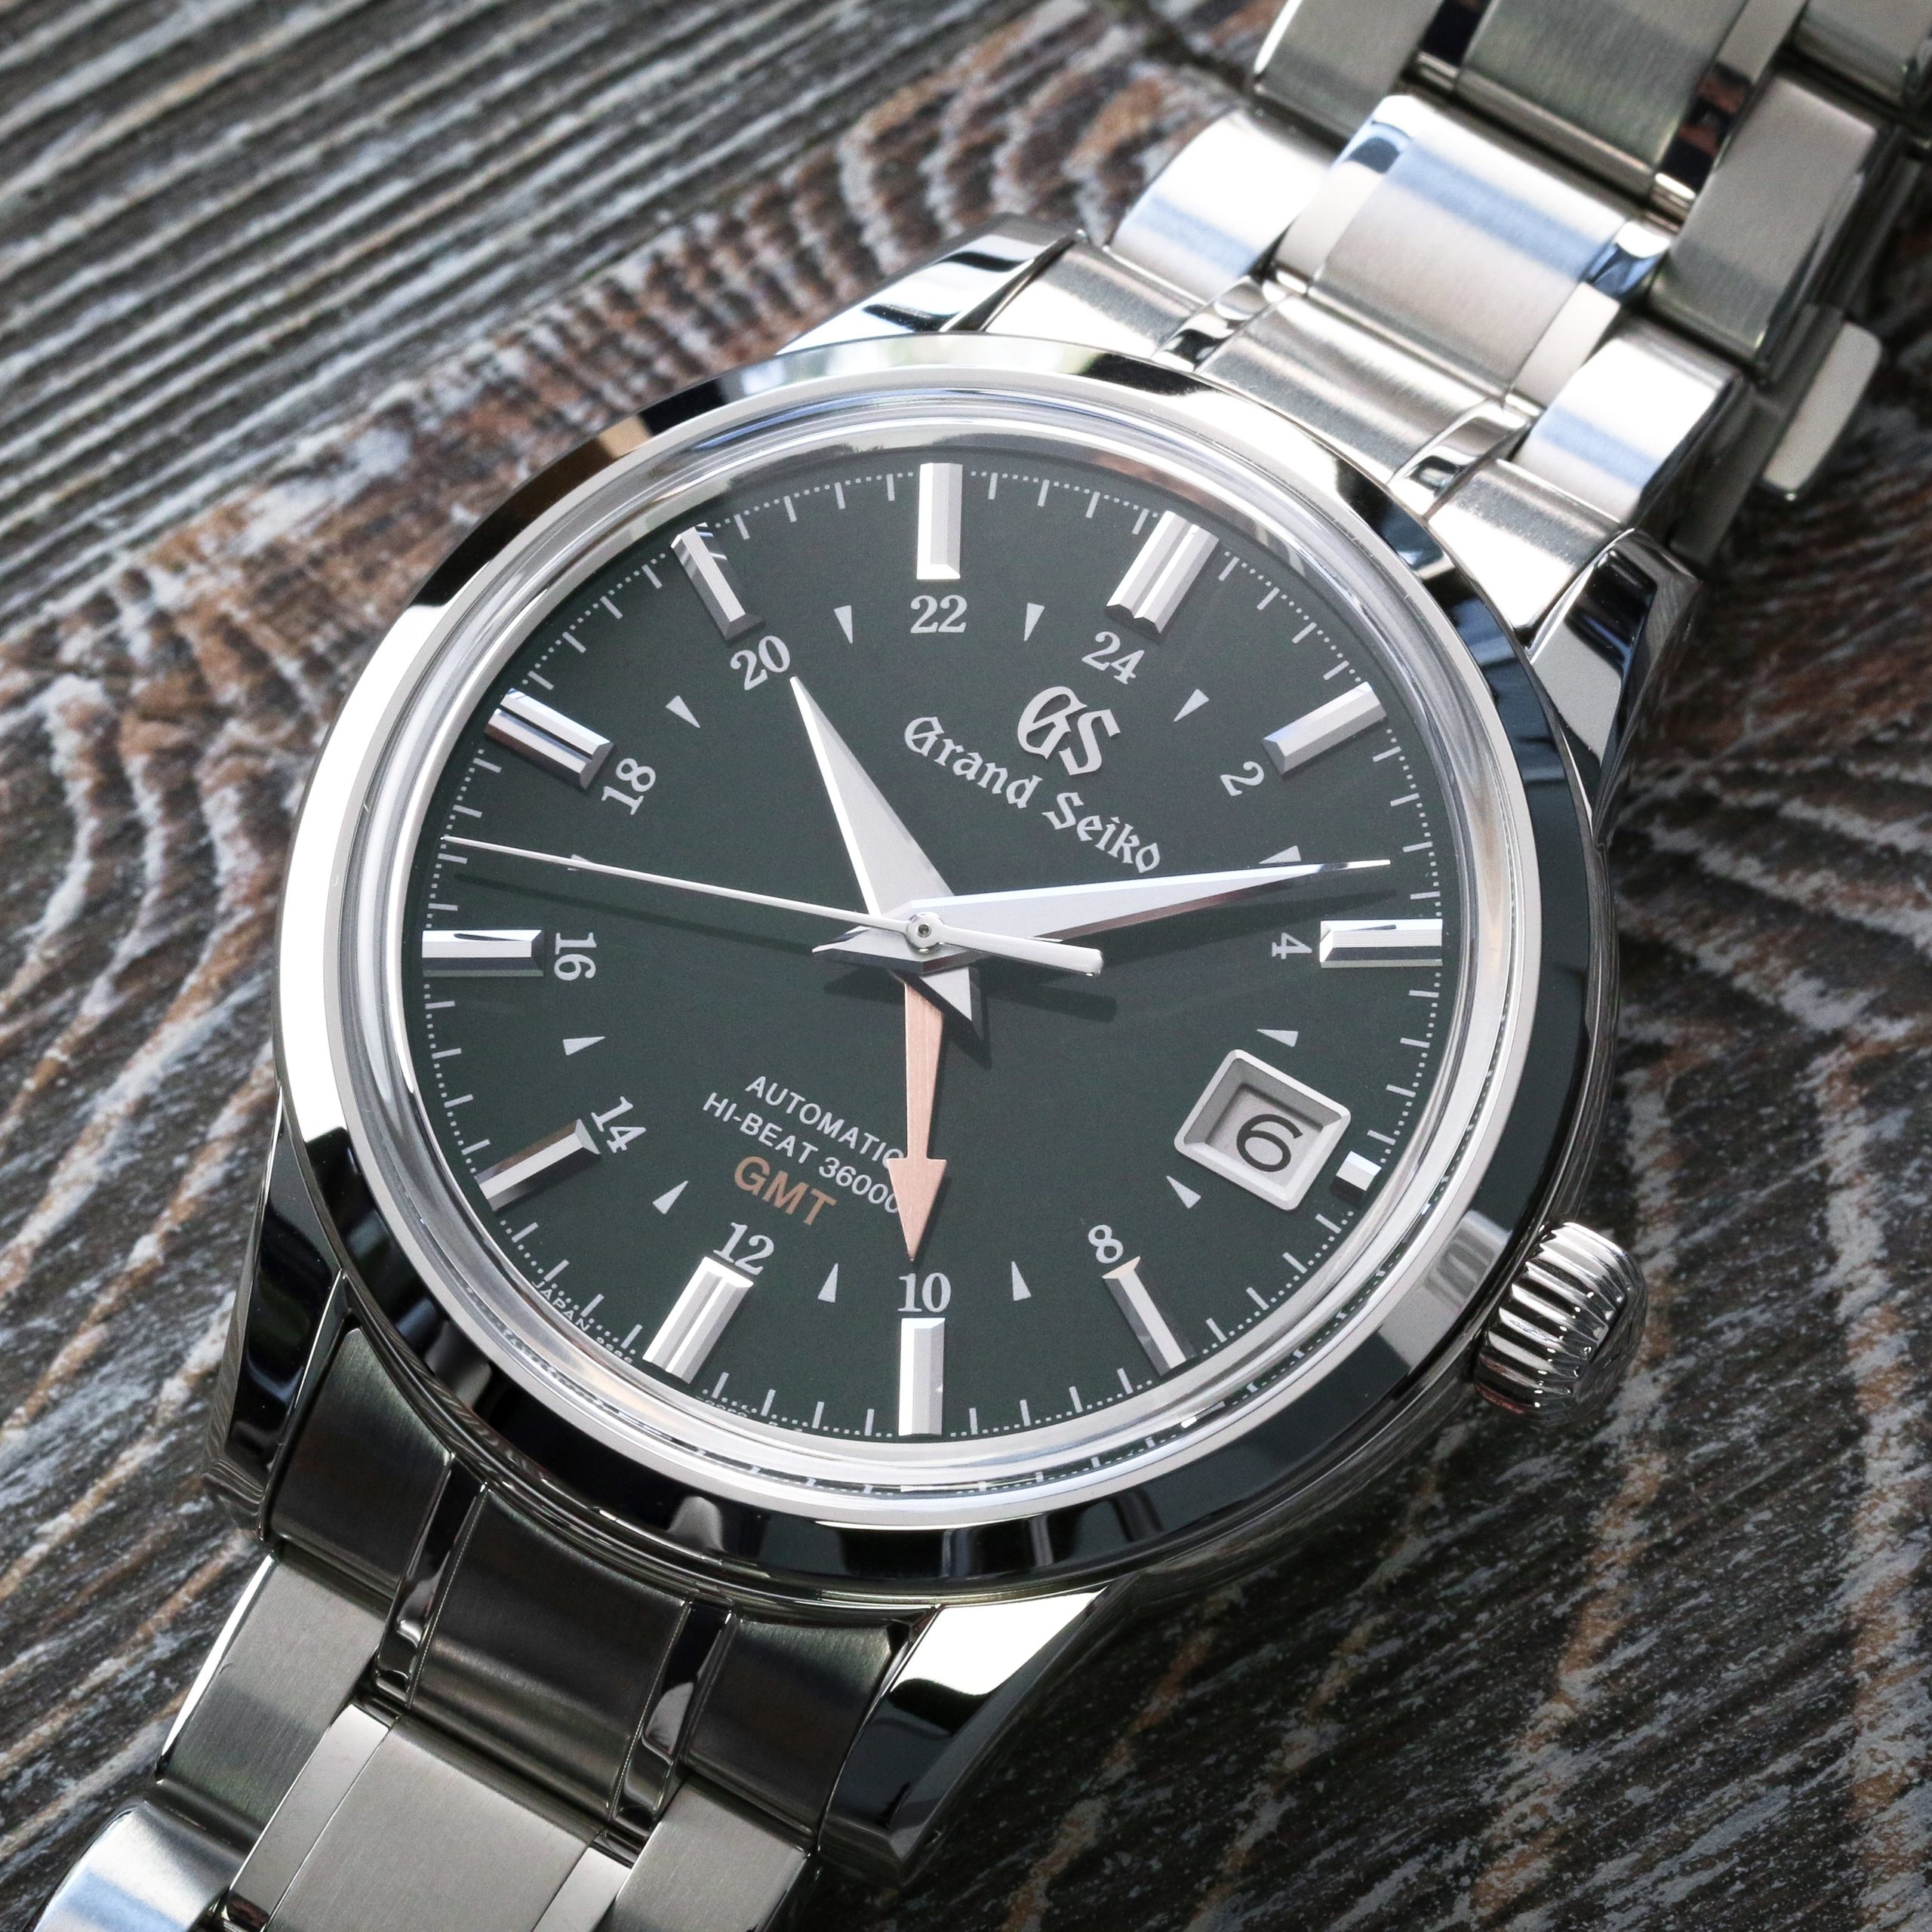 Showing New York 2021: The Grand Seiko Elegance 4 Seasons Collection | WatchTime - USA's No.1 Watch Magazine